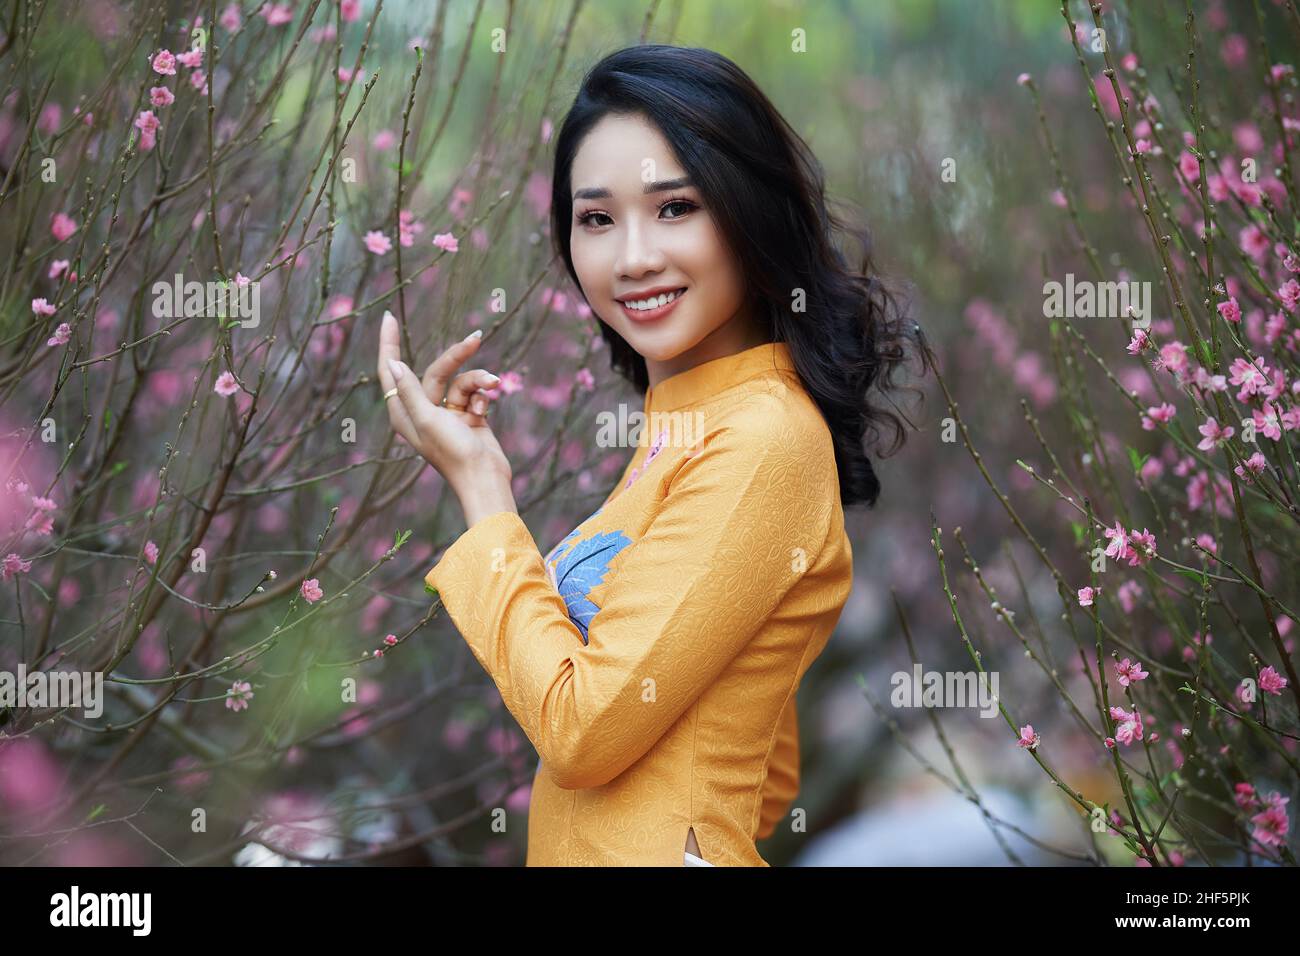 Ho Chi Minh City, Vietnam: Vietnamese girl wearing ao dai posing with peach blossoms to celebrate the new year Stock Photo